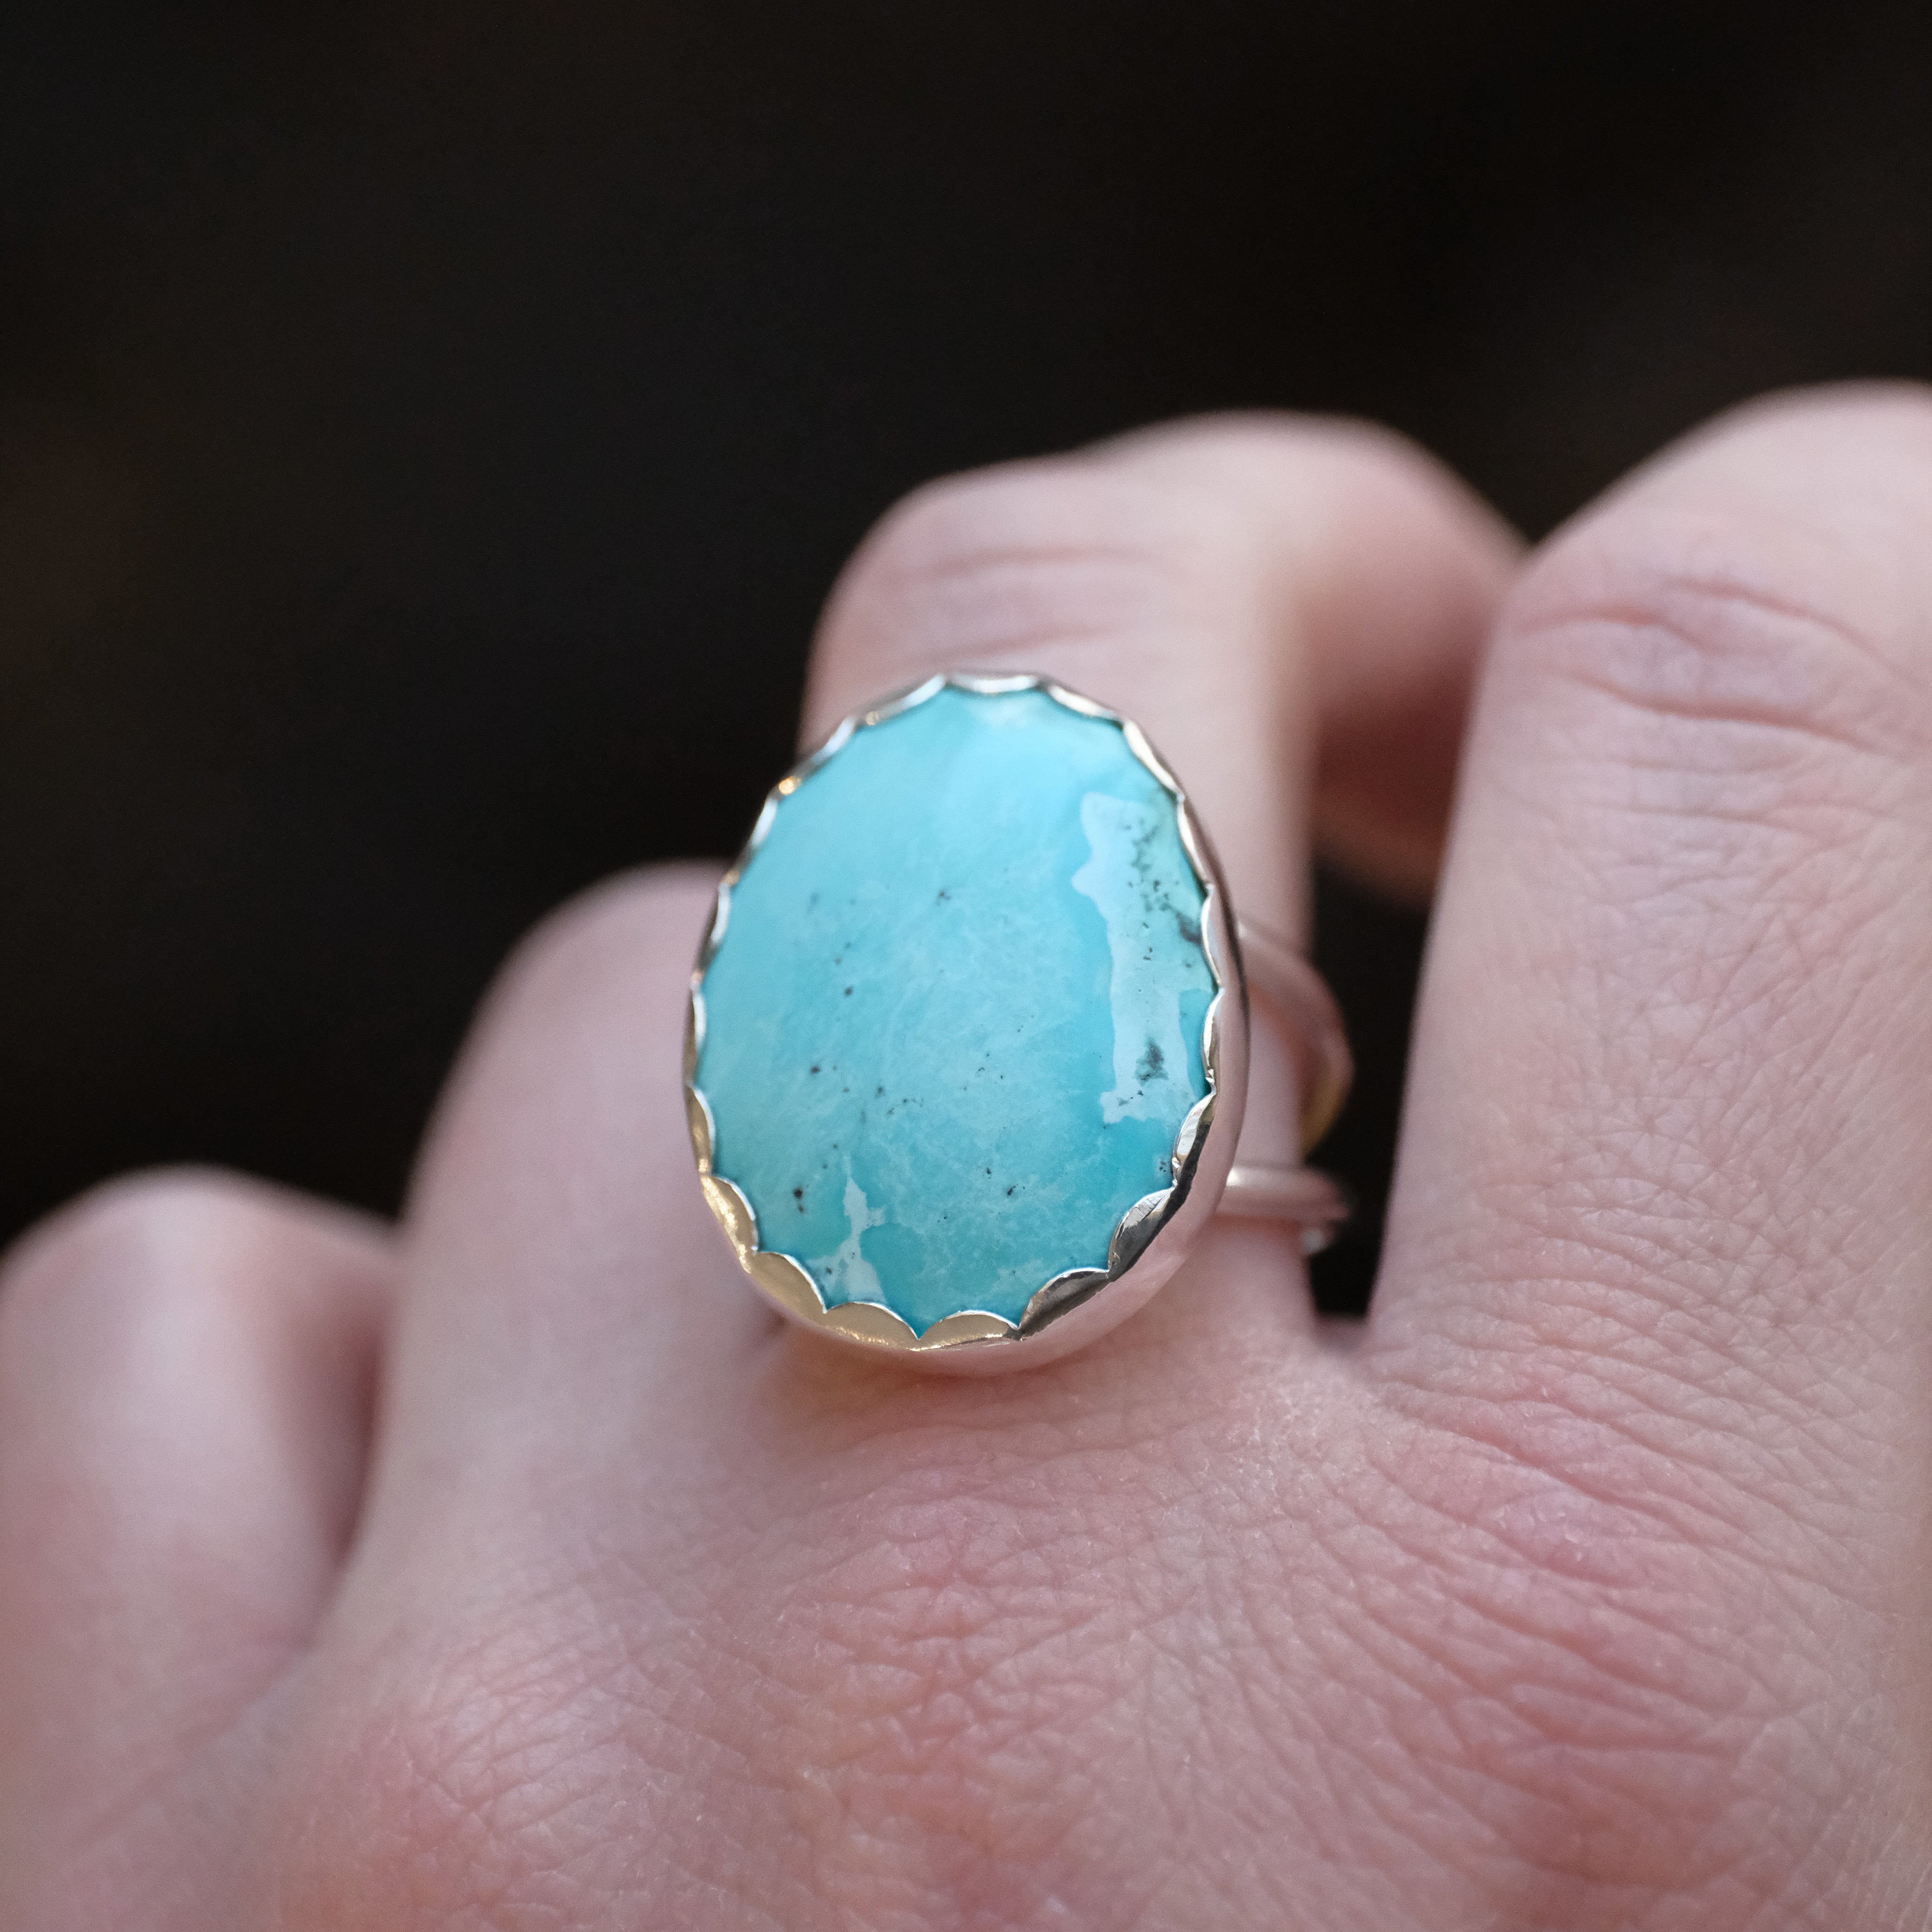 Spring's Bloom Turquoise Ring (Size 7) - One of a Kind